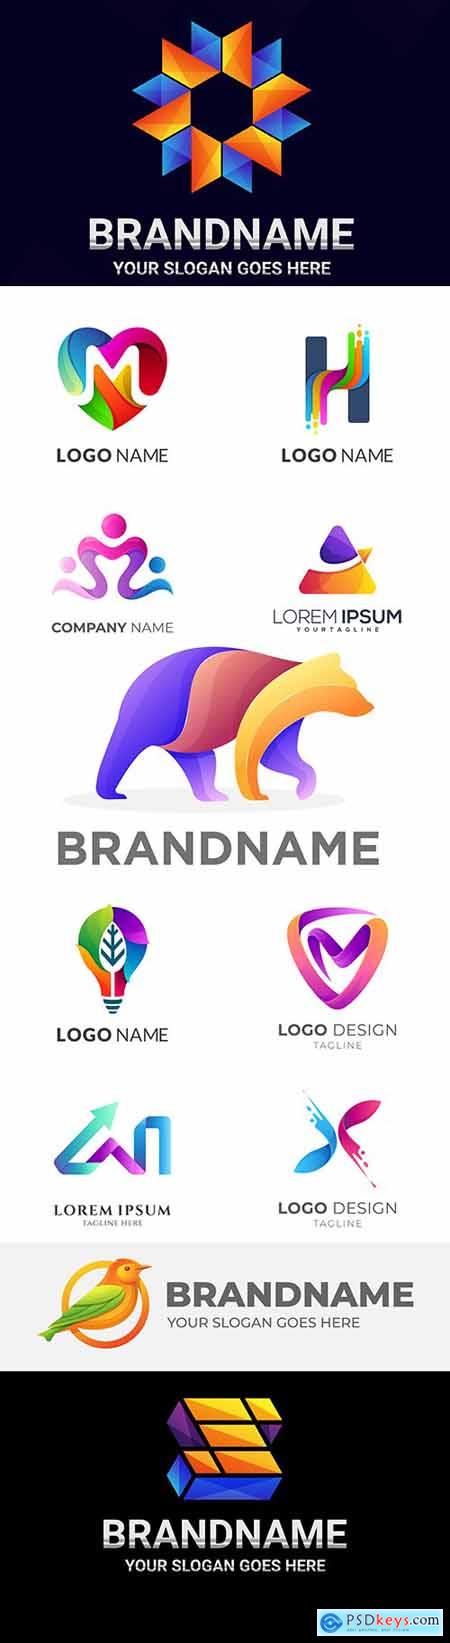 Brand name company logos business corporate design 20 » Free Download